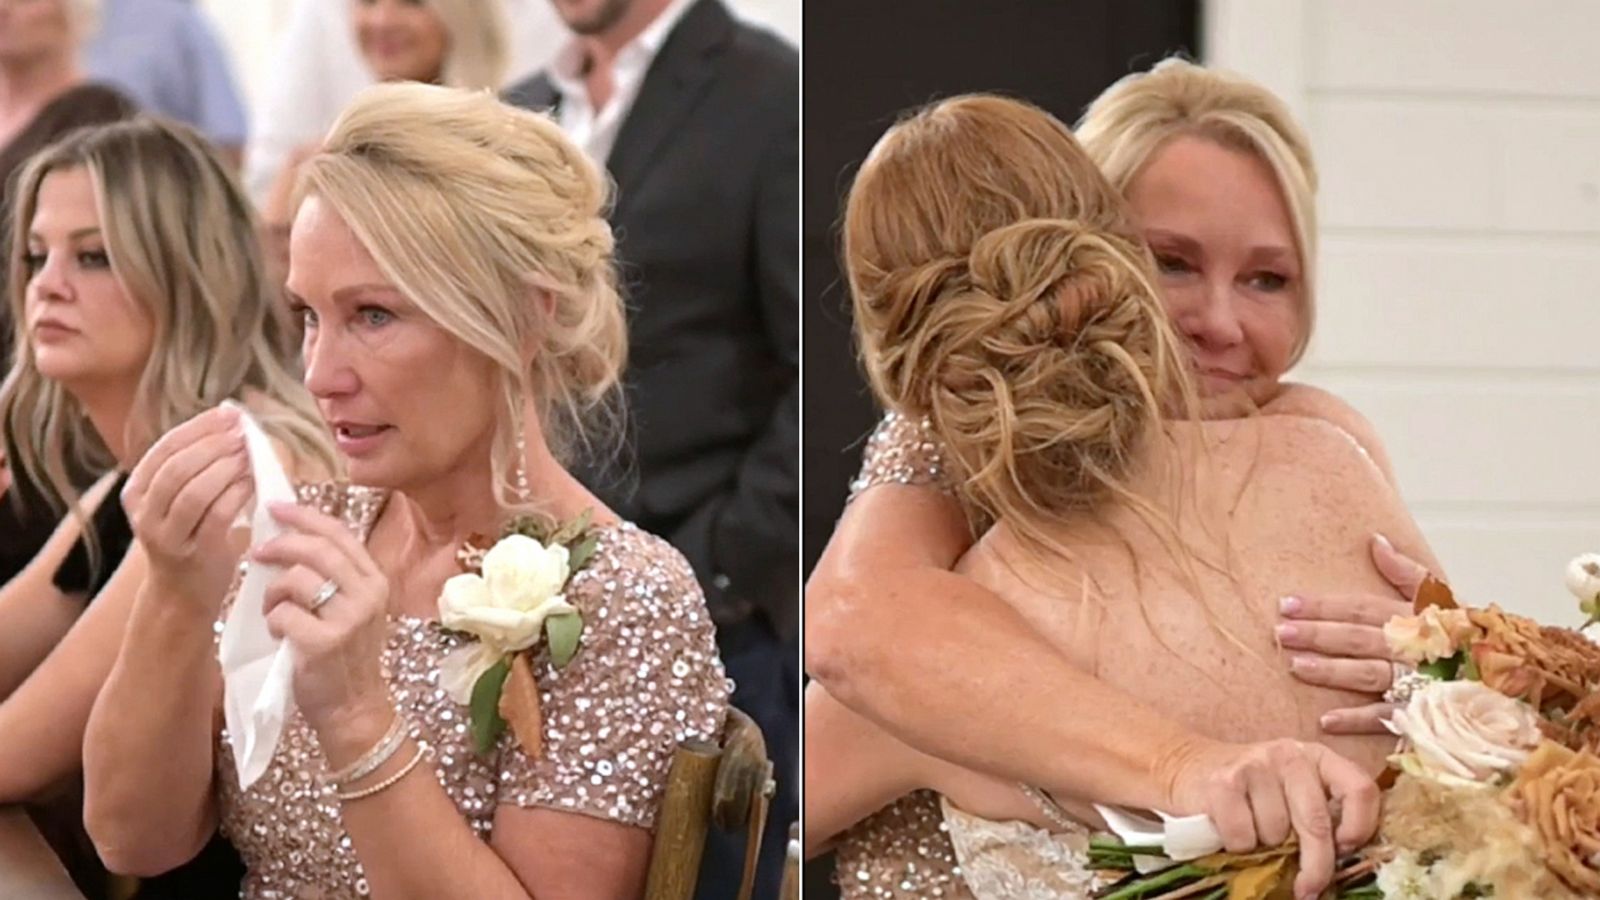 PHOTO: Briana Coffey surprised her mother Tracy Keith at her wedding by sharing her bouquet with her instead of holding a traditional bouquet toss.